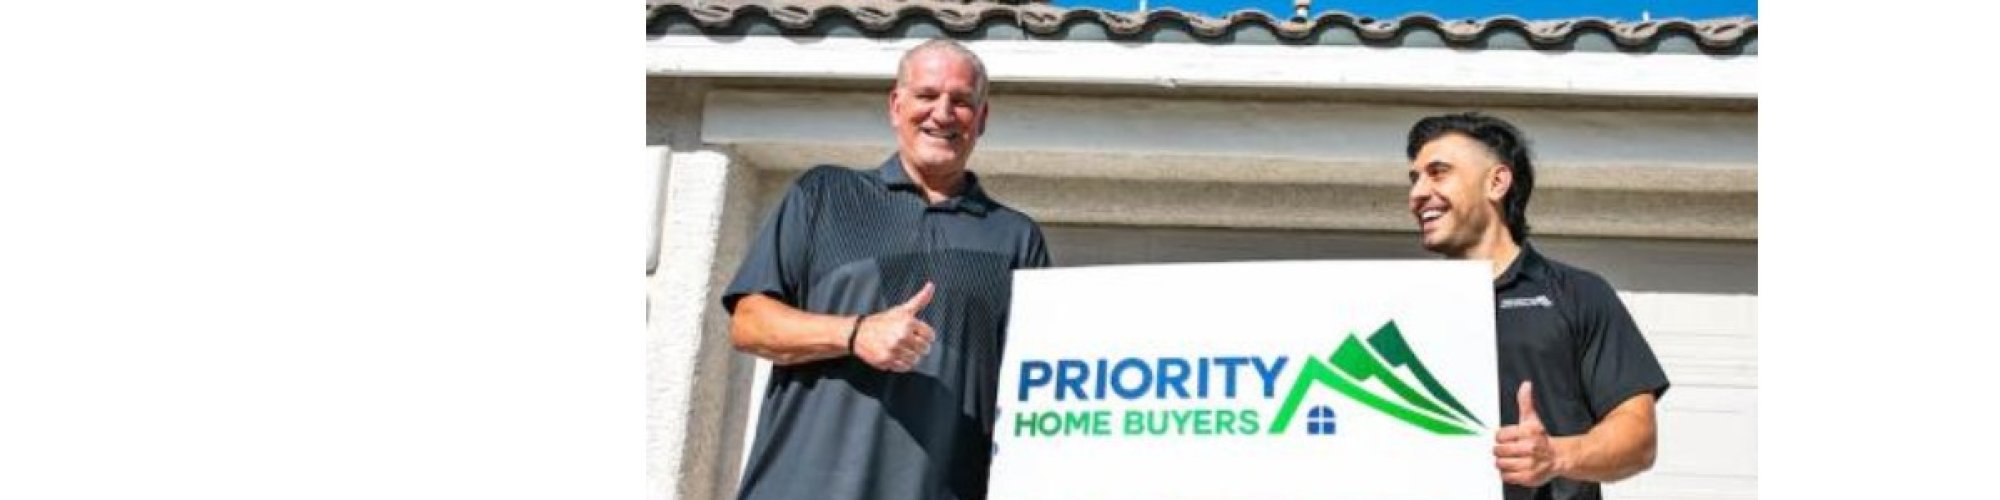 Priority Home Buyers | Sell My House Fast for Cash Stockton